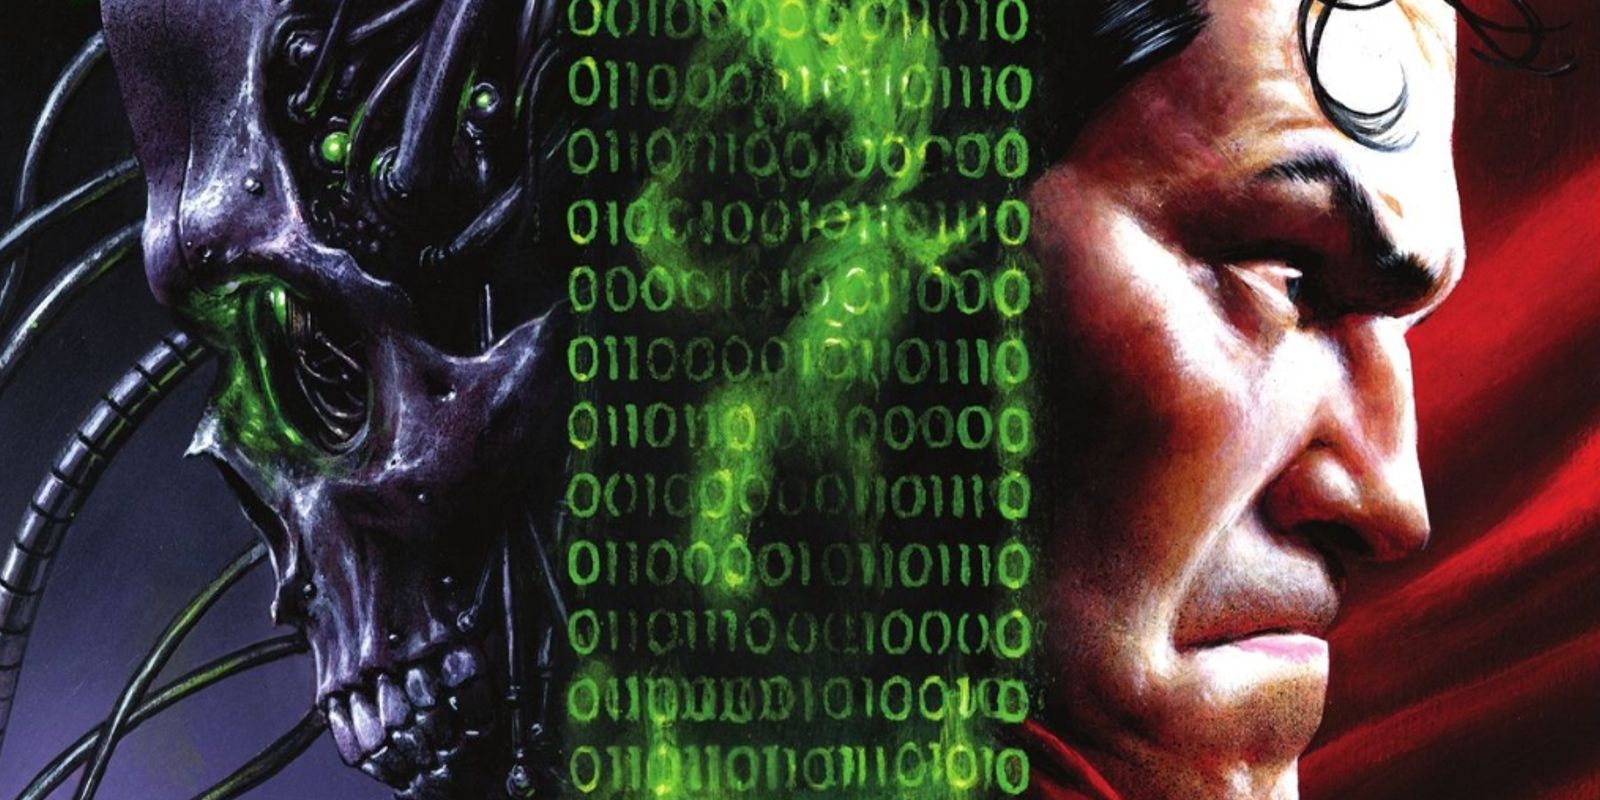 the visages of metallo and superman back-to-back with a column of binary code between them